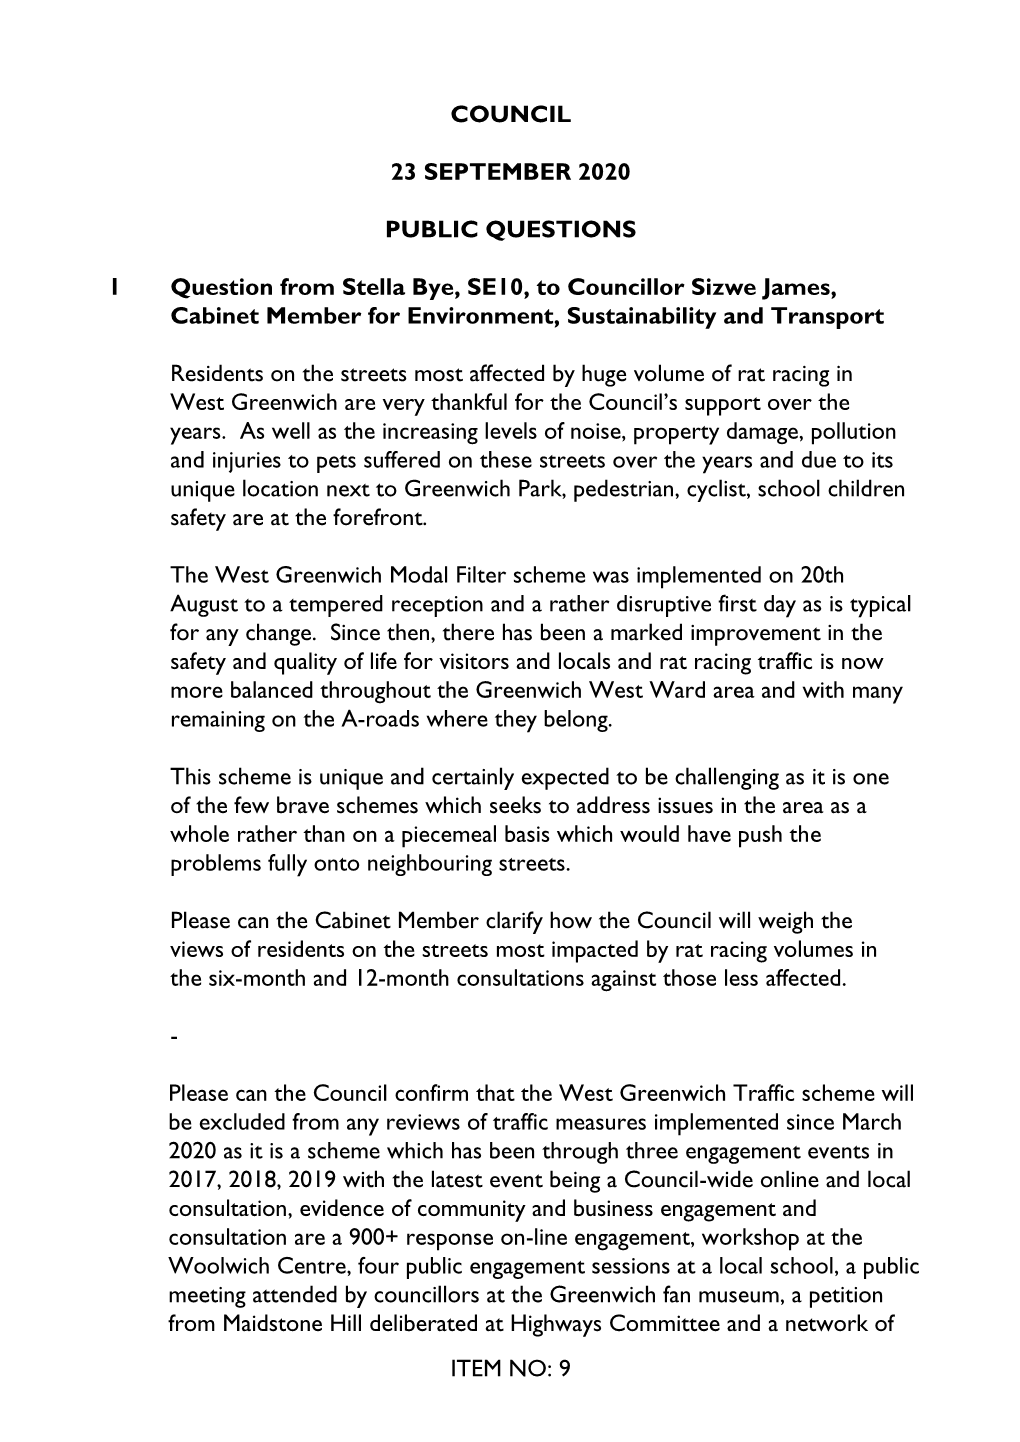 ITEM NO: 9 COUNCIL 23 SEPTEMBER 2020 PUBLIC QUESTIONS 1 Question from Stella Bye, SE10, to Councillor Sizwe James, Cabinet Membe